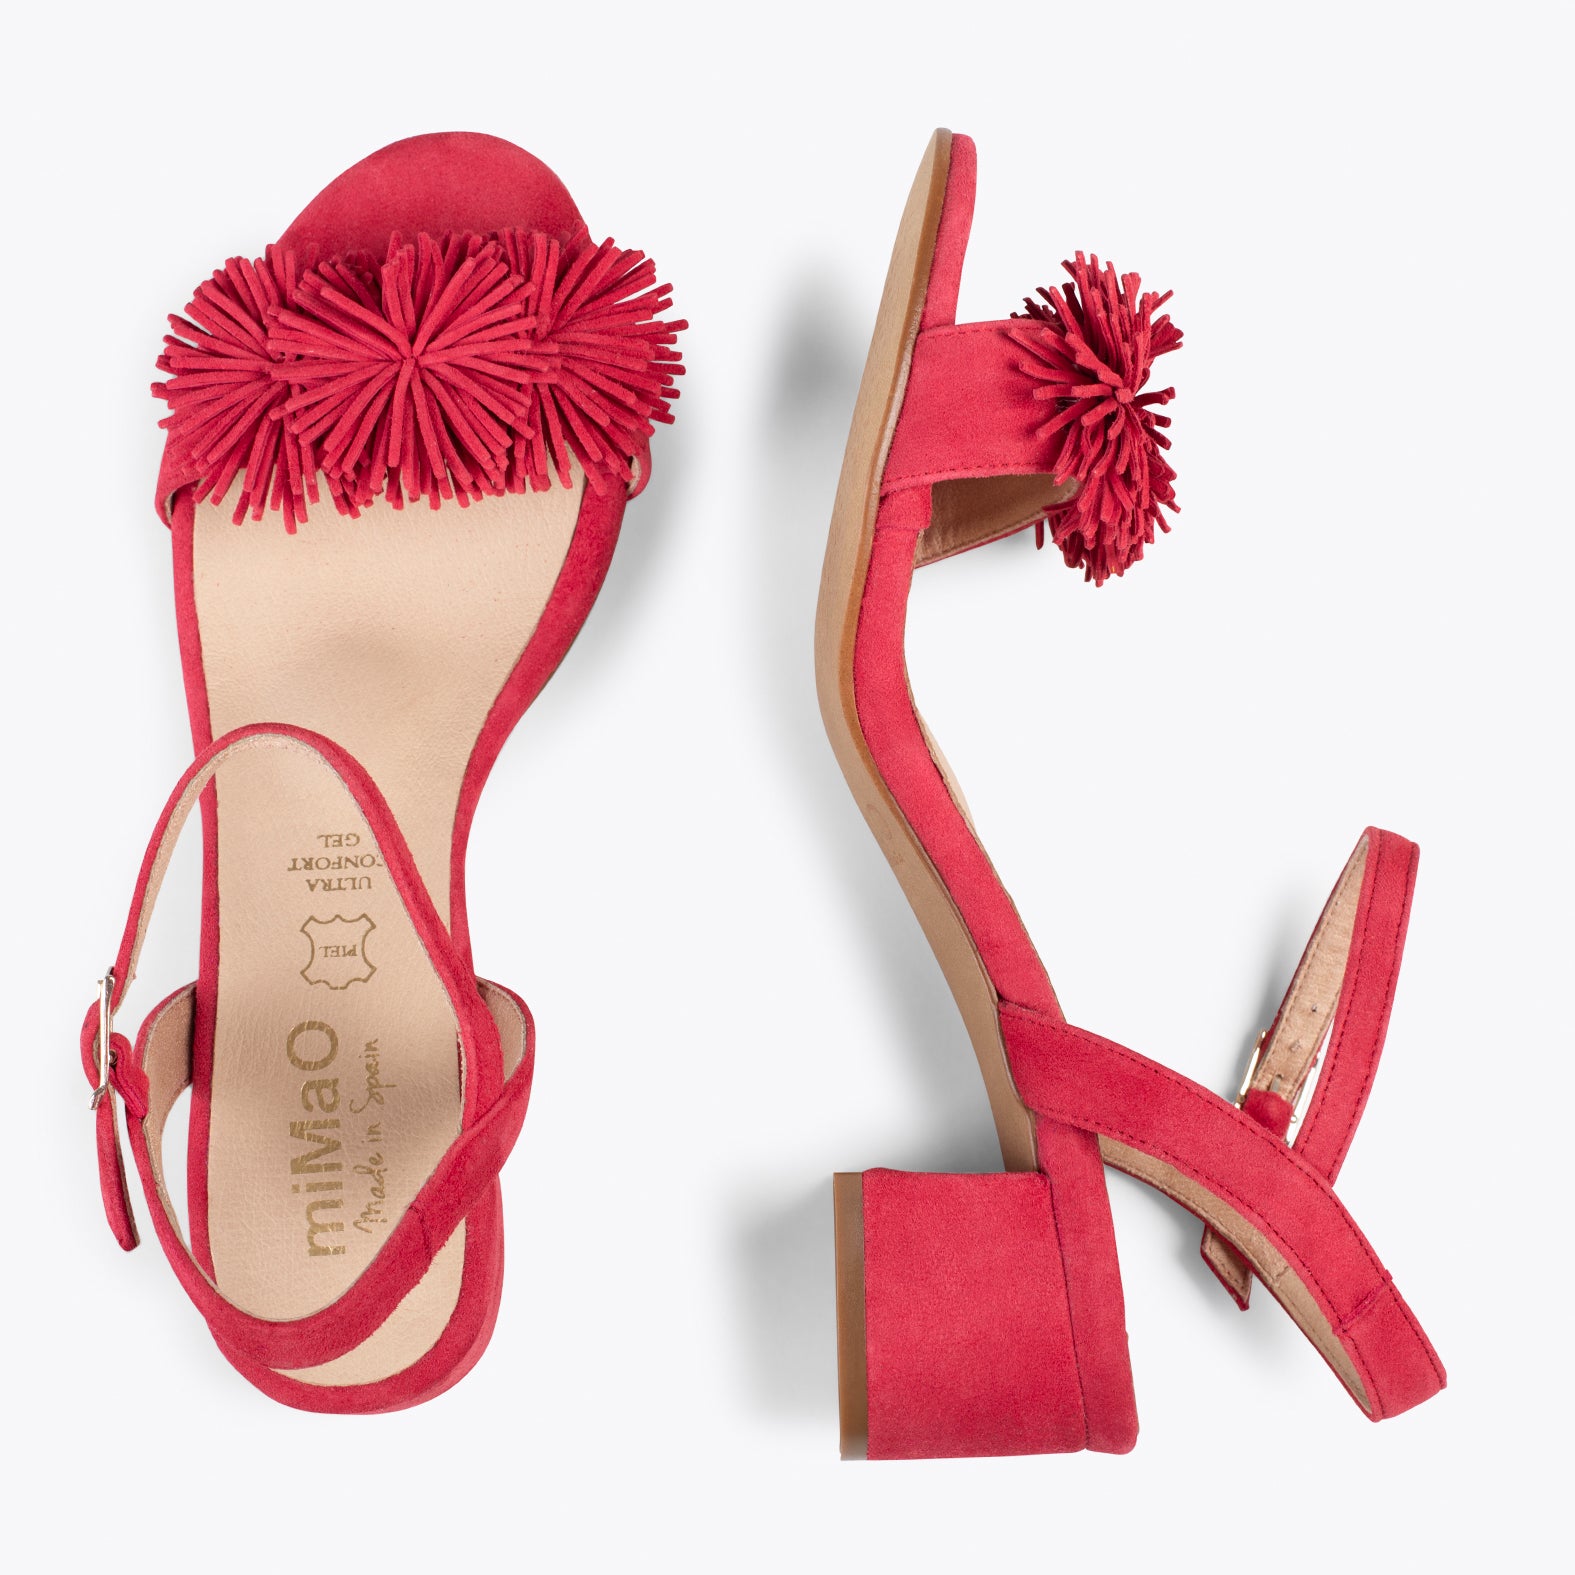 ZINNIA – RED sandals with pompom details